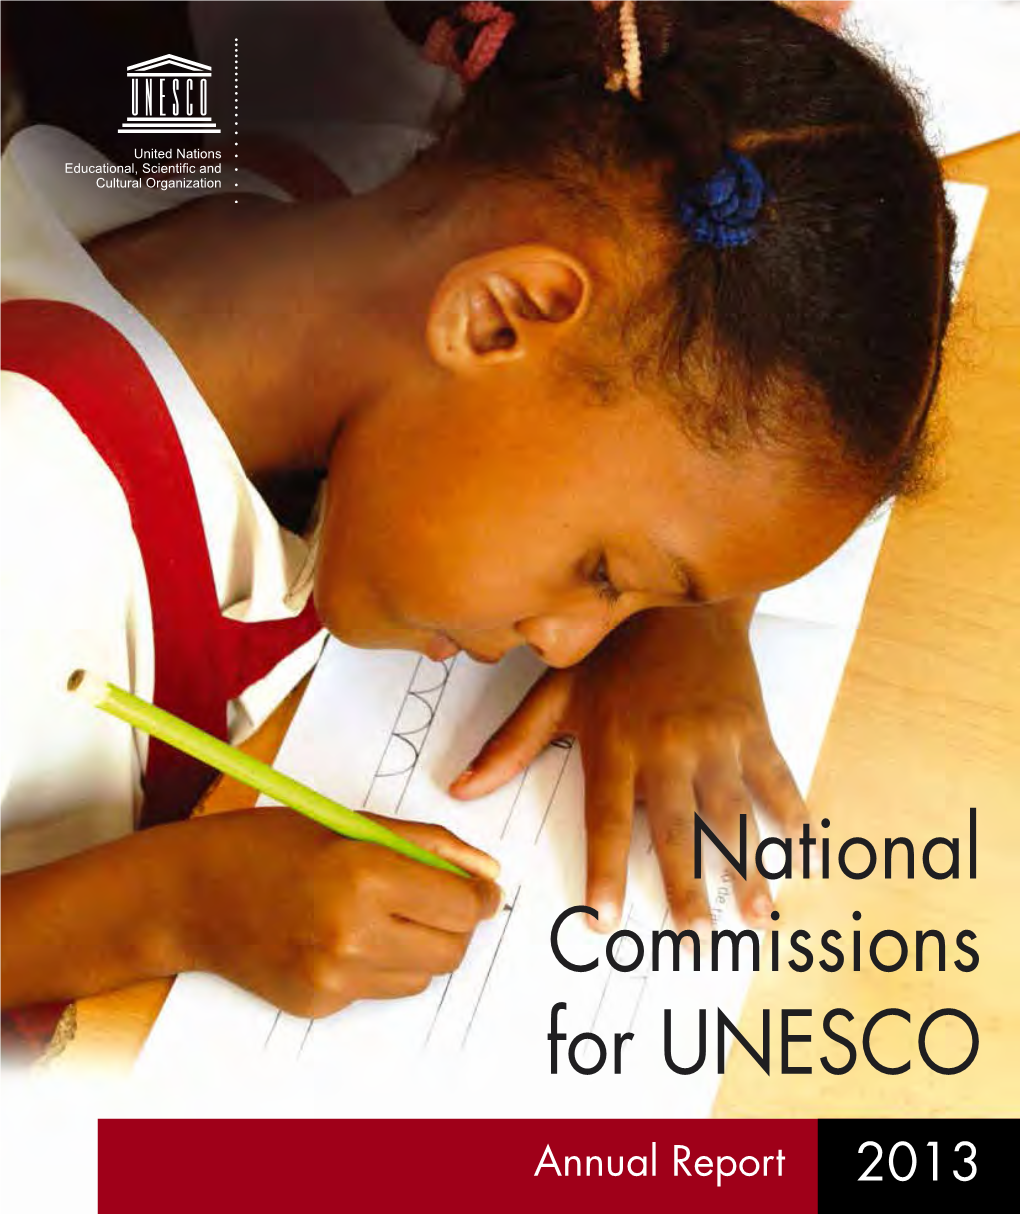 Annual Report of National Commissions for UNESCO – 2013 Annual Report